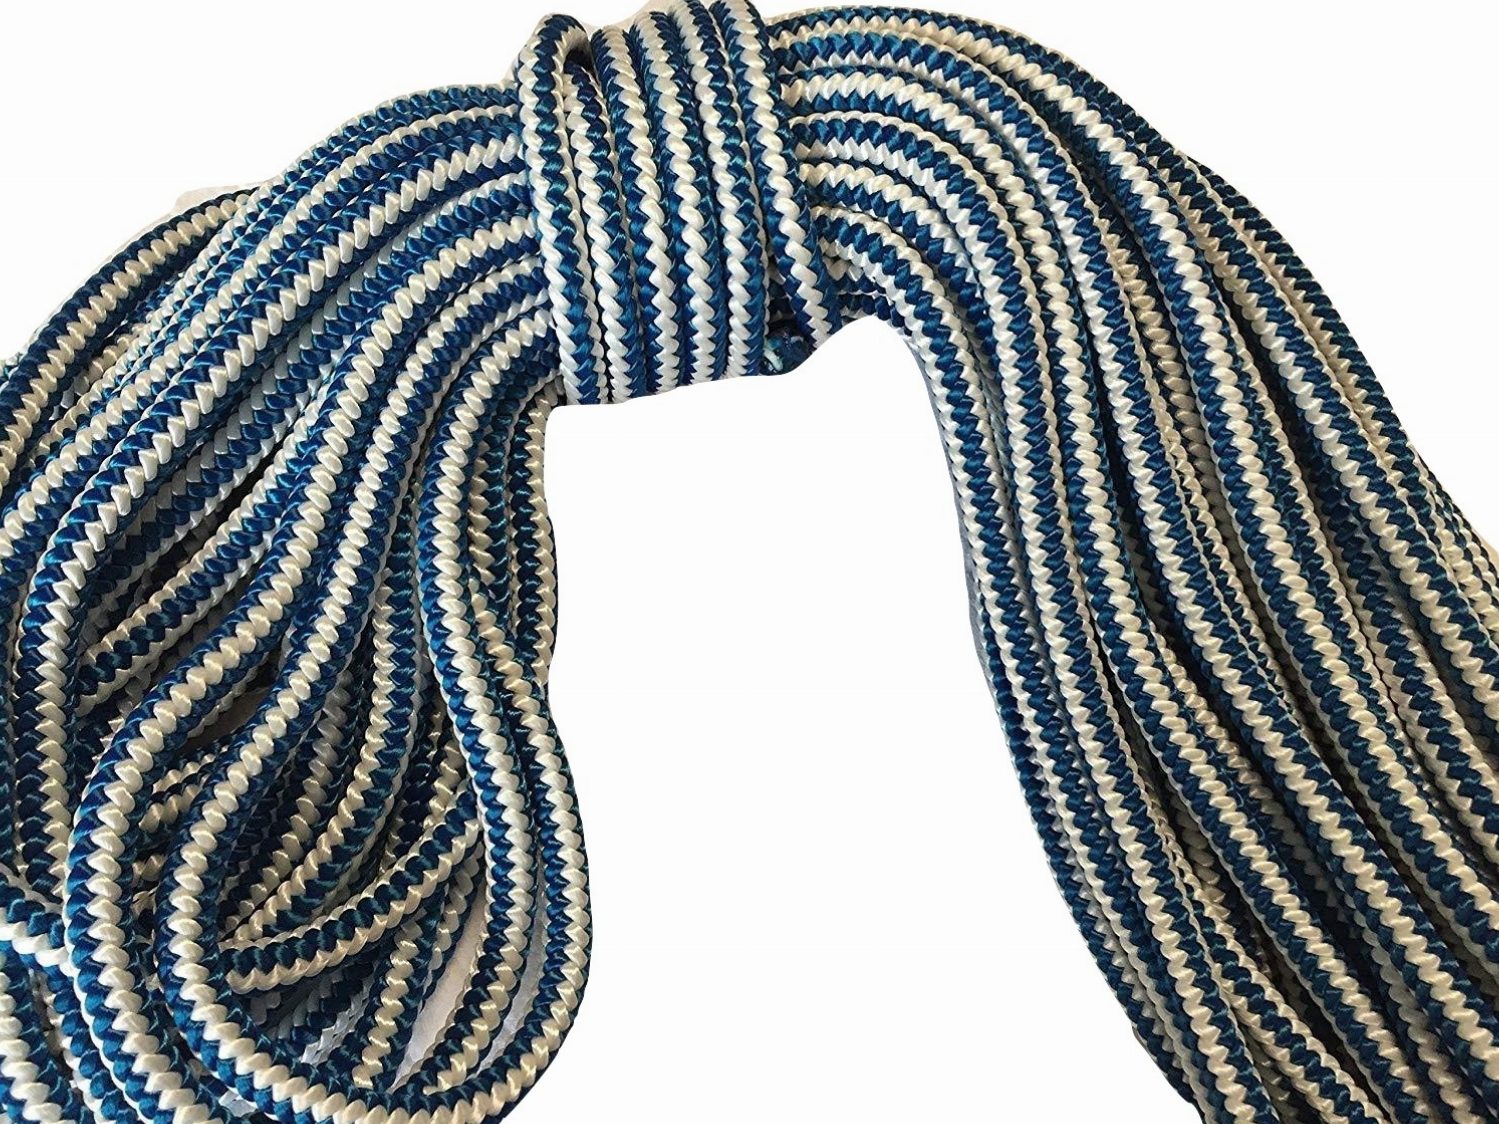  Blue Ox Rope 3/4 Inch by 150 Feet 12 Carrier 24 Strand Arborist  Bull Rope, White/Blue, Made in The USA : Tools & Home Improvement